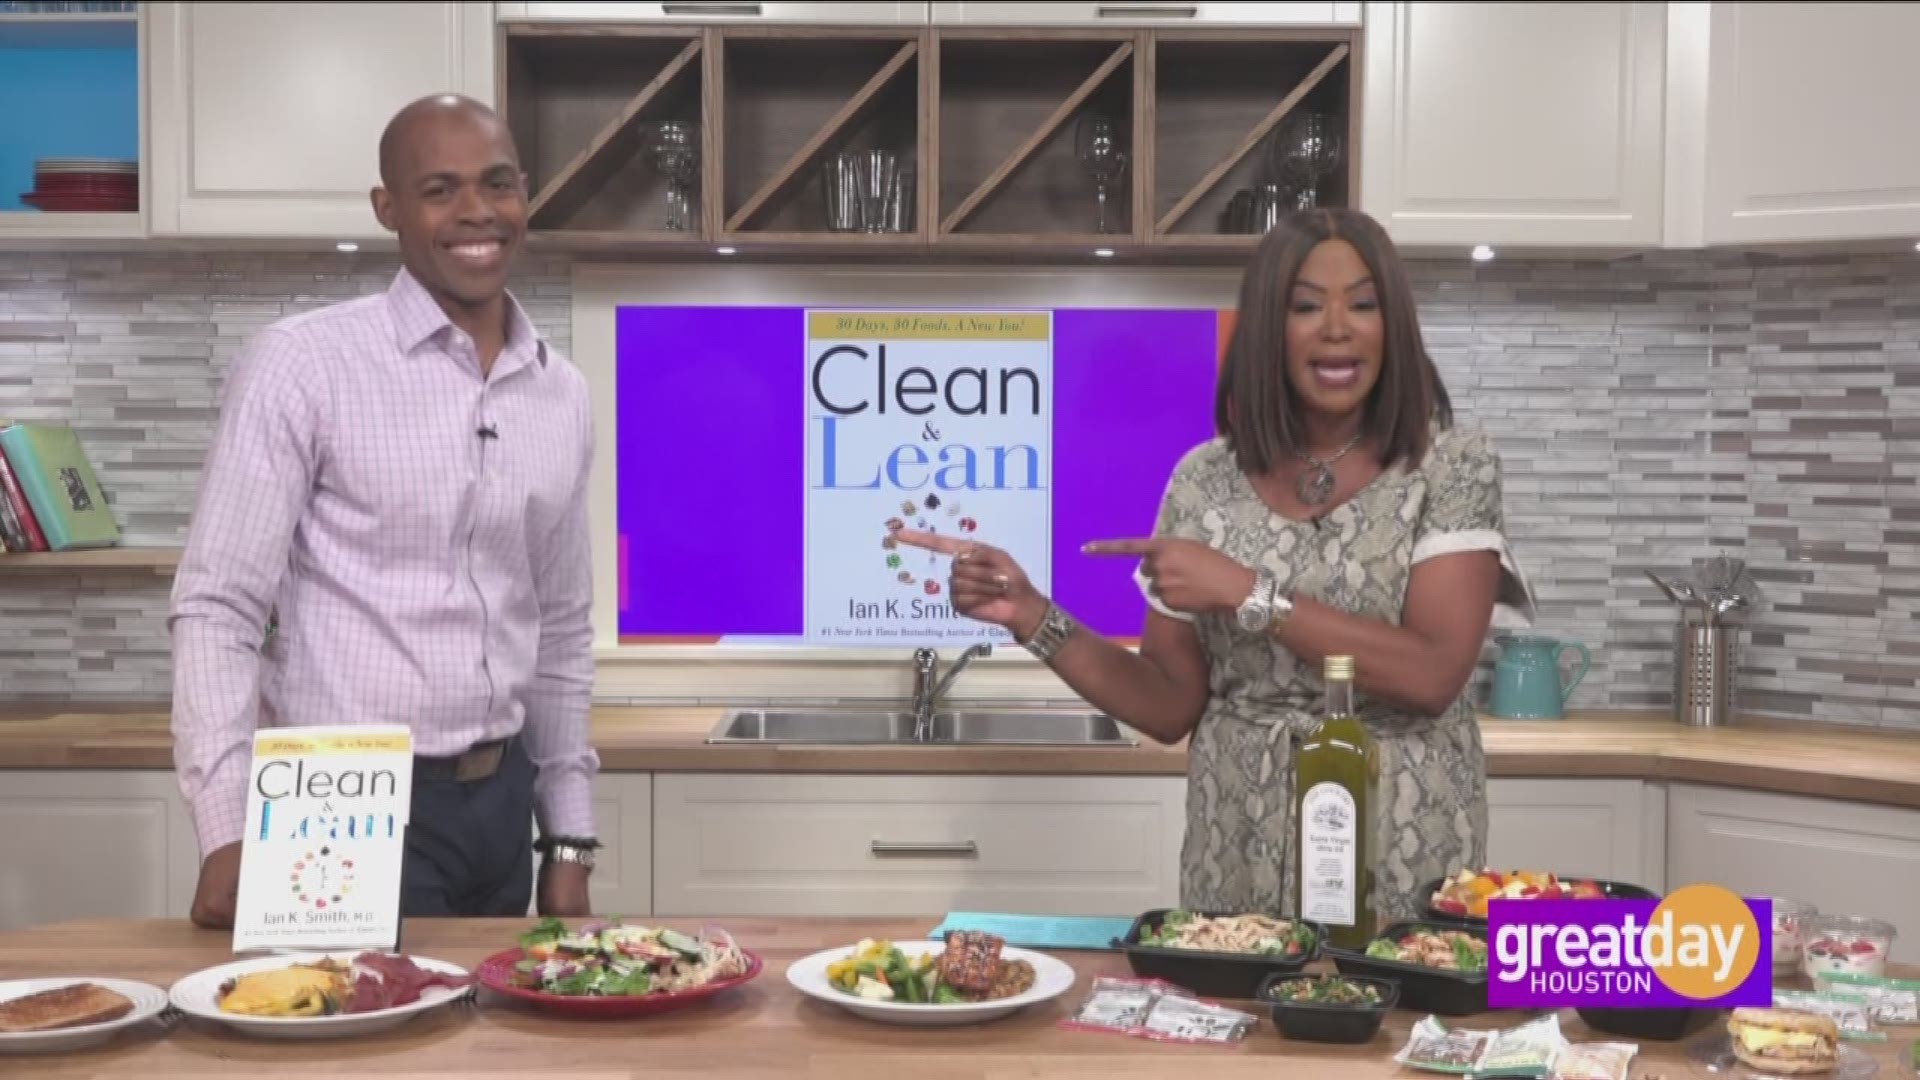 Dr. Ian Smith discusses the meals you can "digest" in his new program from his latest book "Clean & Lean."